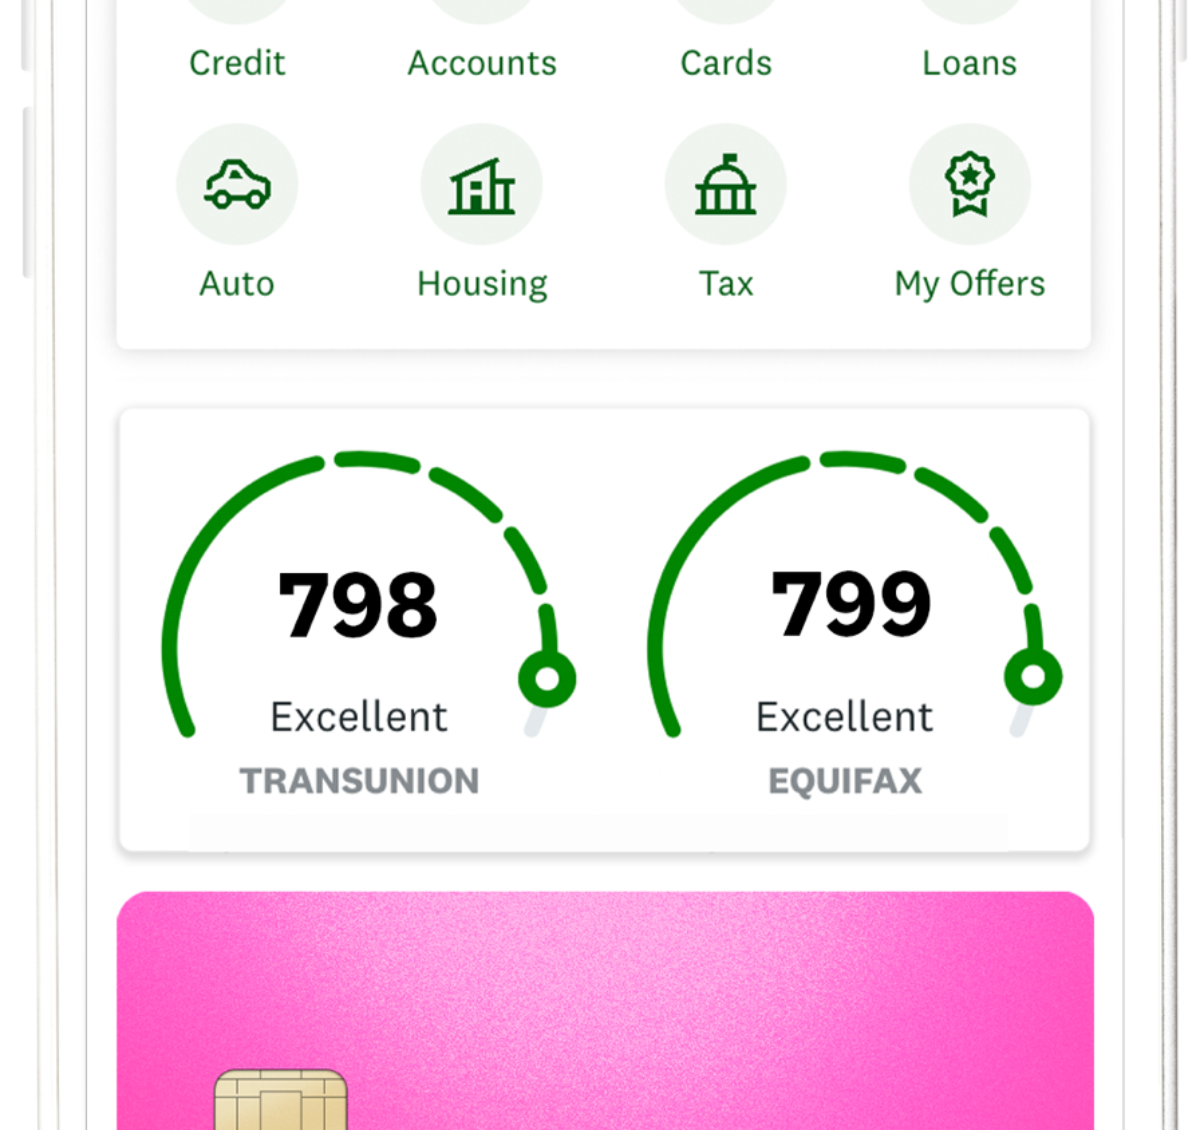 Why Is My Credit Karma Score Higher Than My FICO Score?